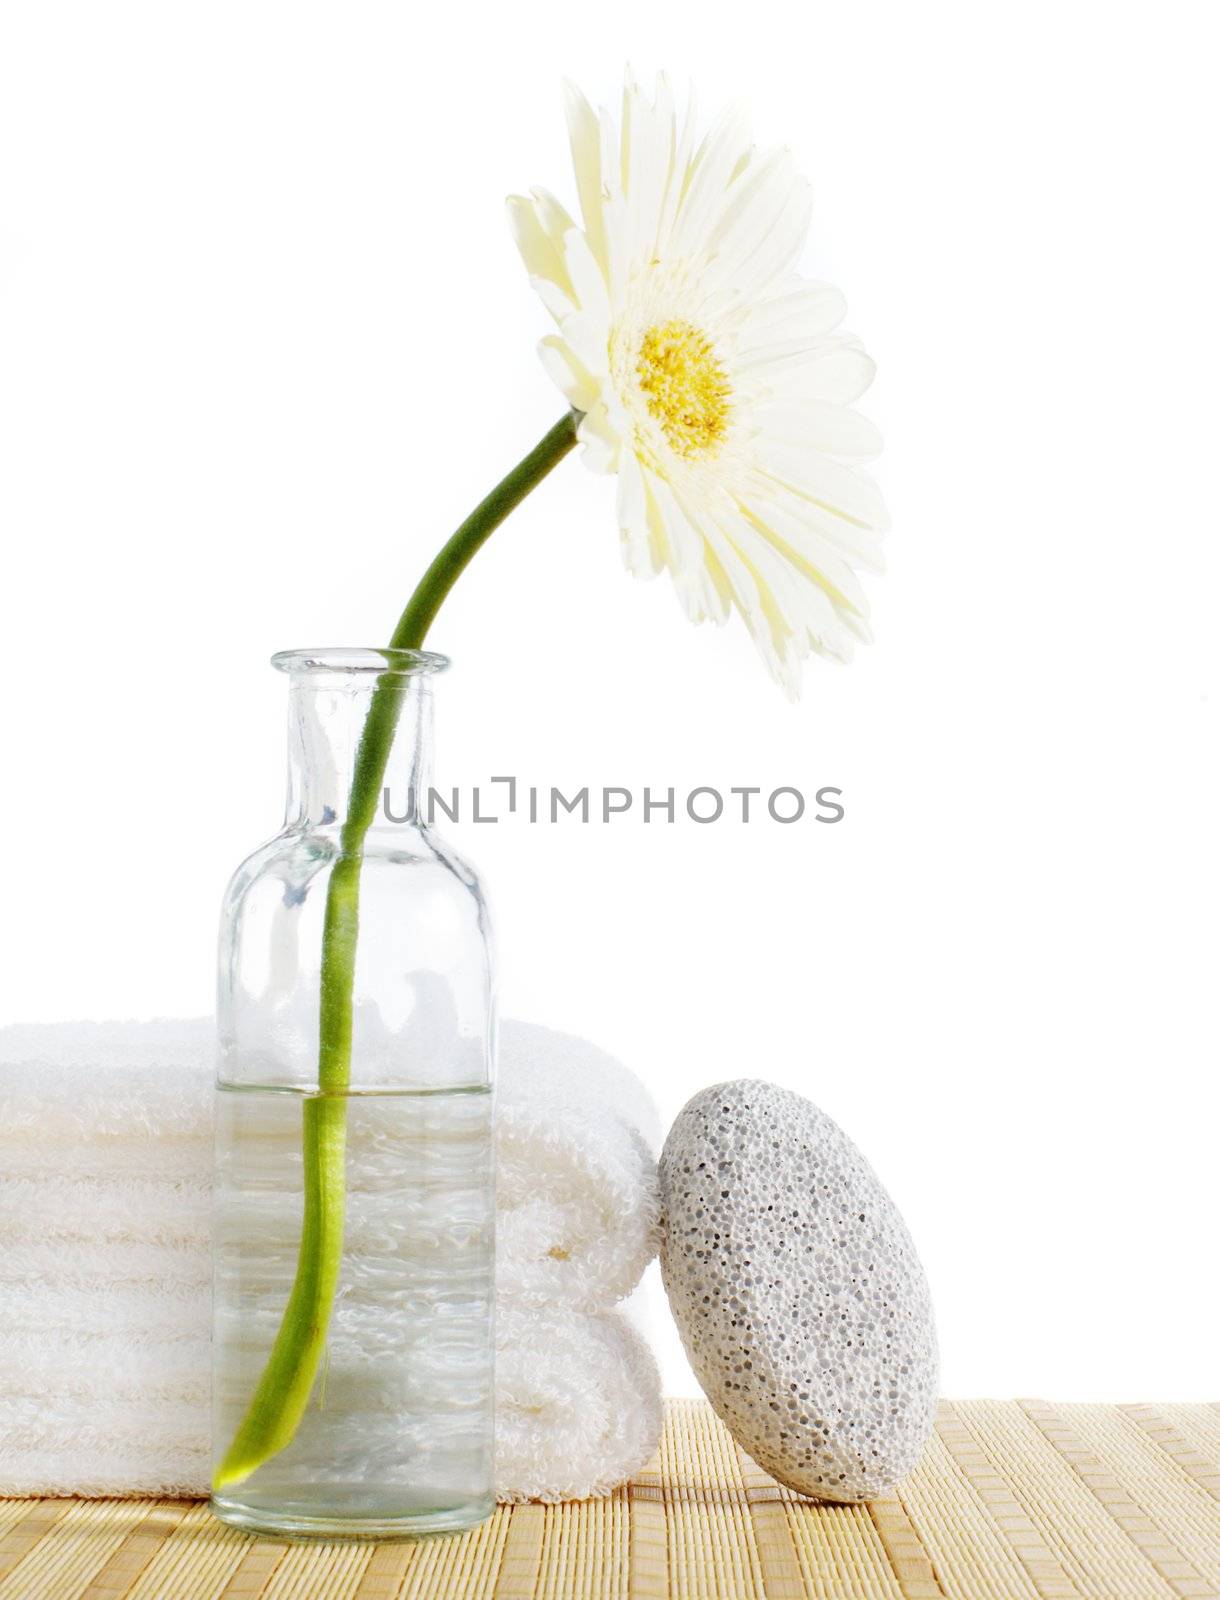 Flower, towels, and pumice stone against a white background.